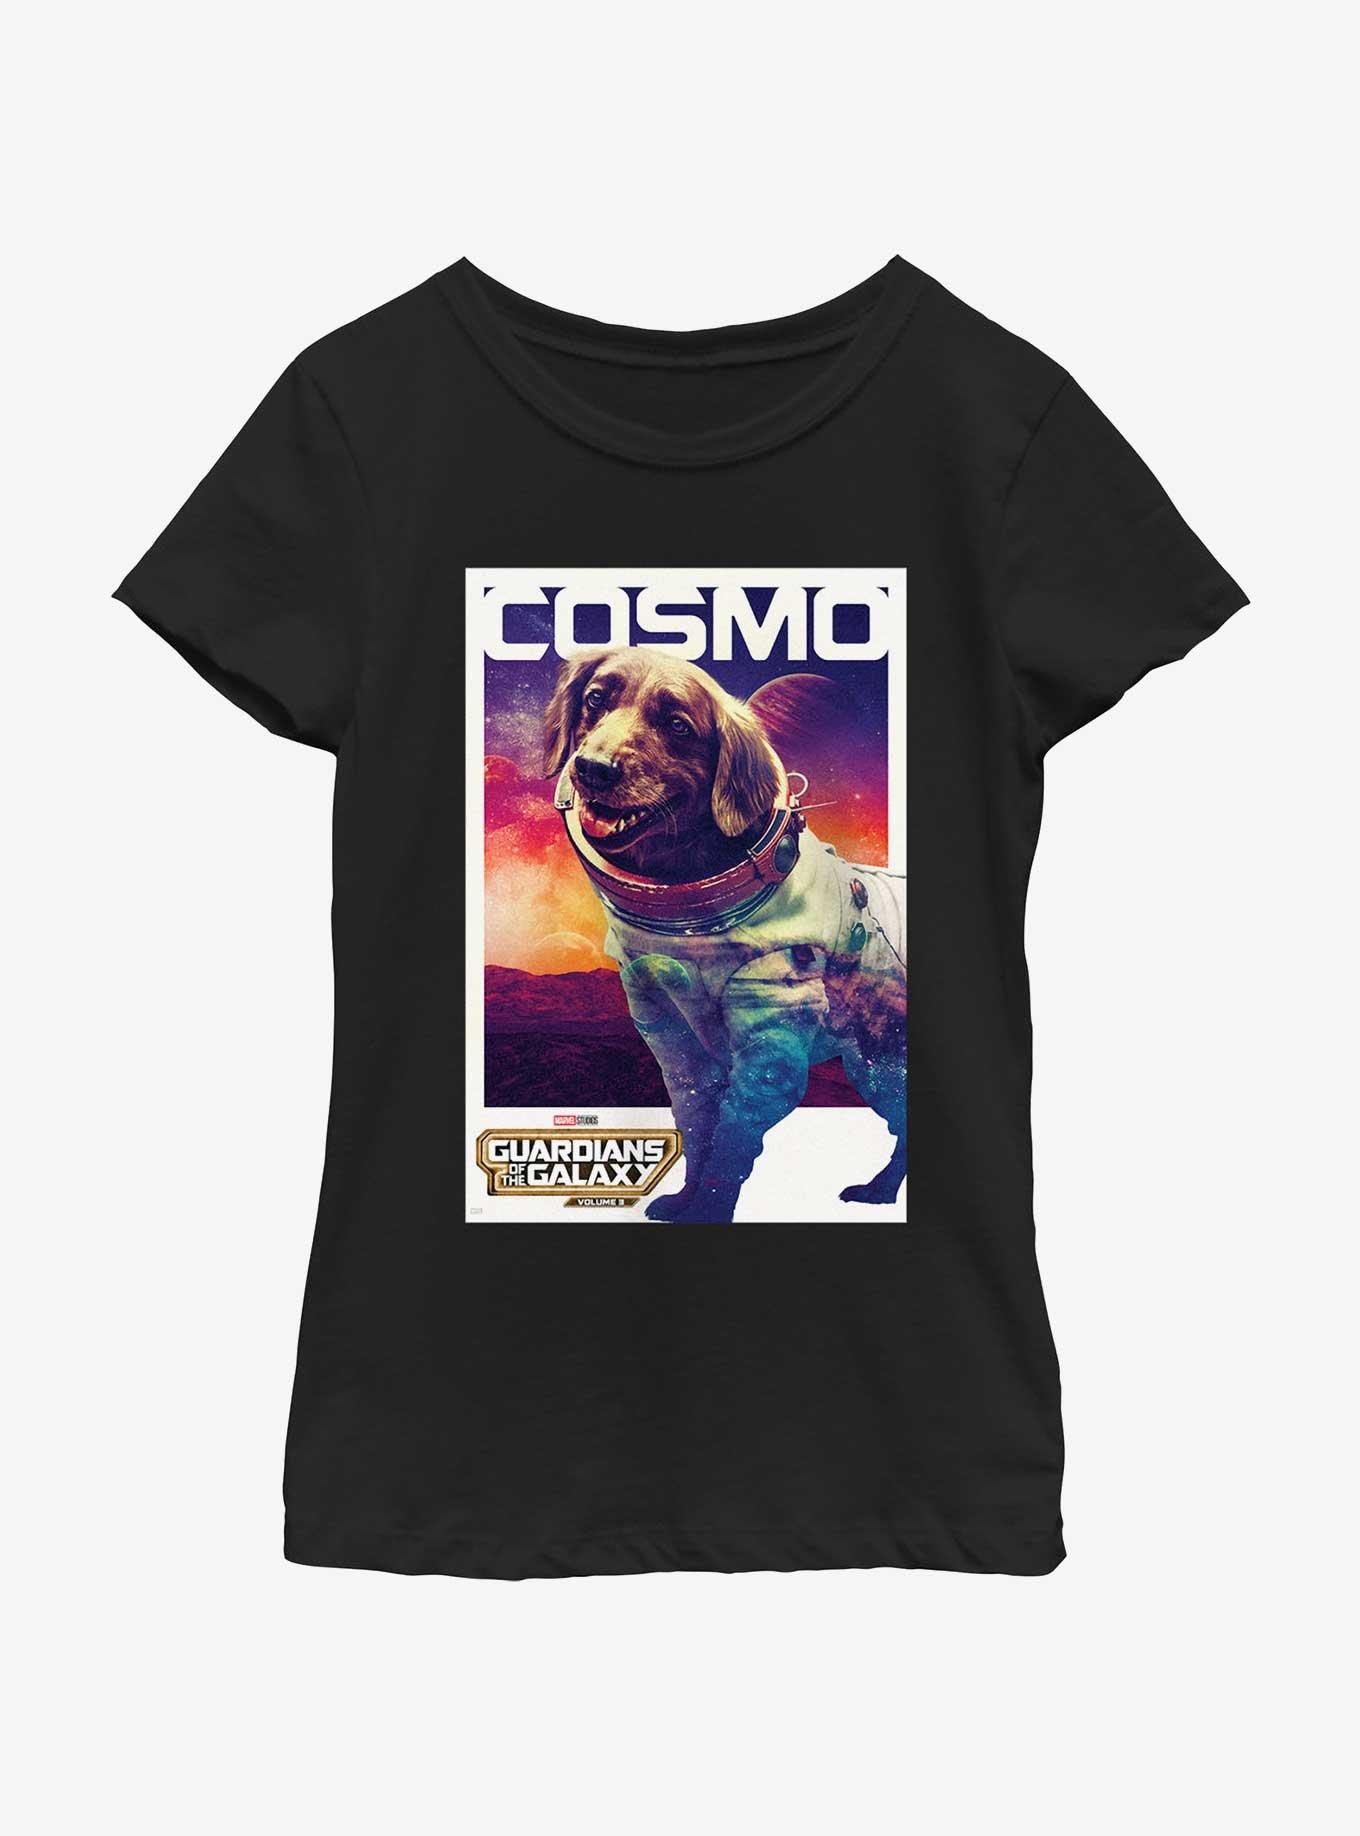 Guardians Of The Galaxy Vol. 3 Cosmo Poster Youth Girls T-Shirt, BLACK, hi-res